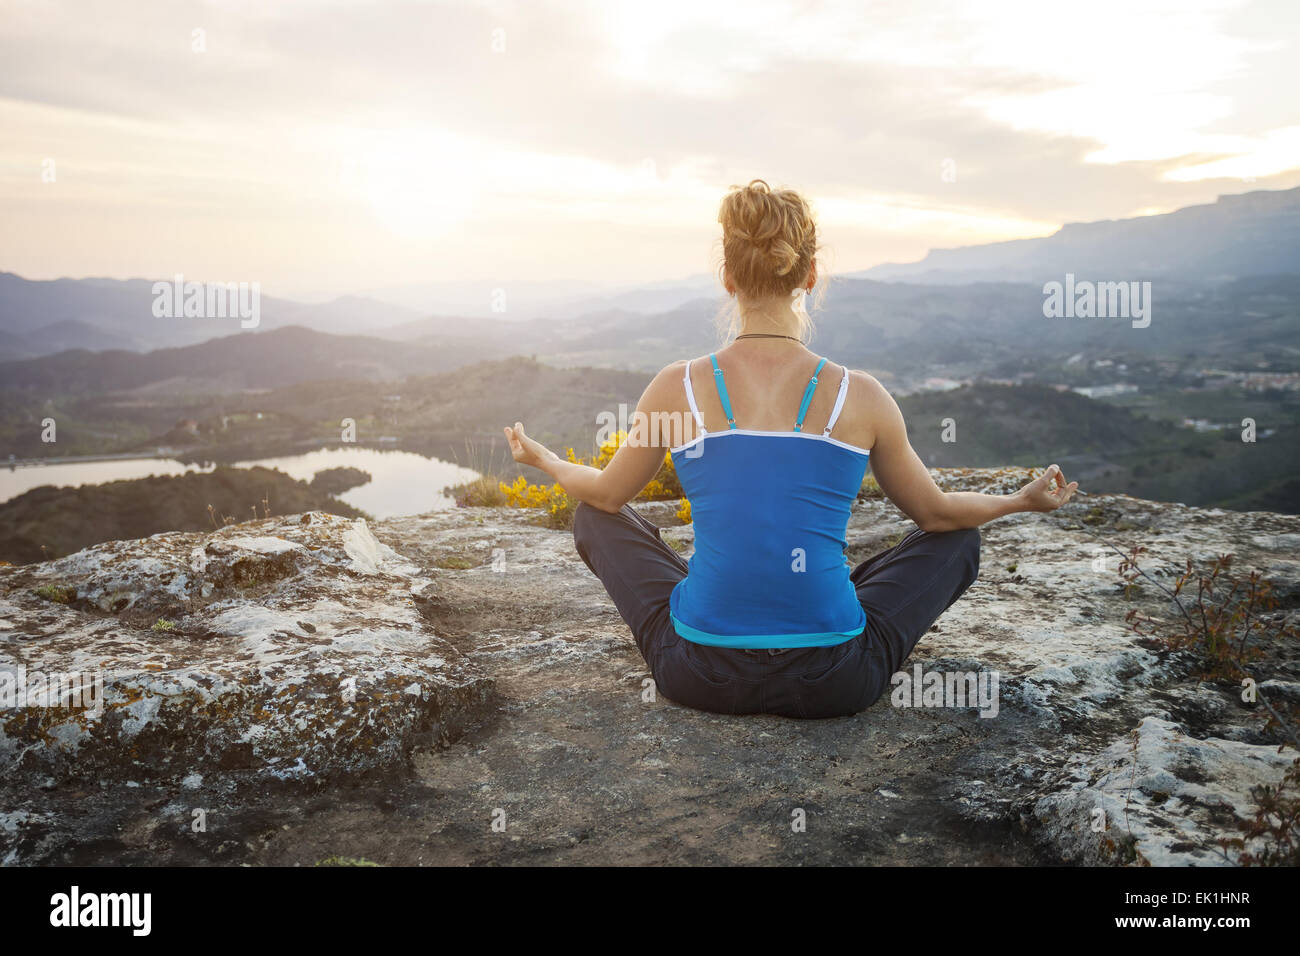 Young woman sitting on a rock and enjoying valley view. Girl sits in asana position. Stock Photo